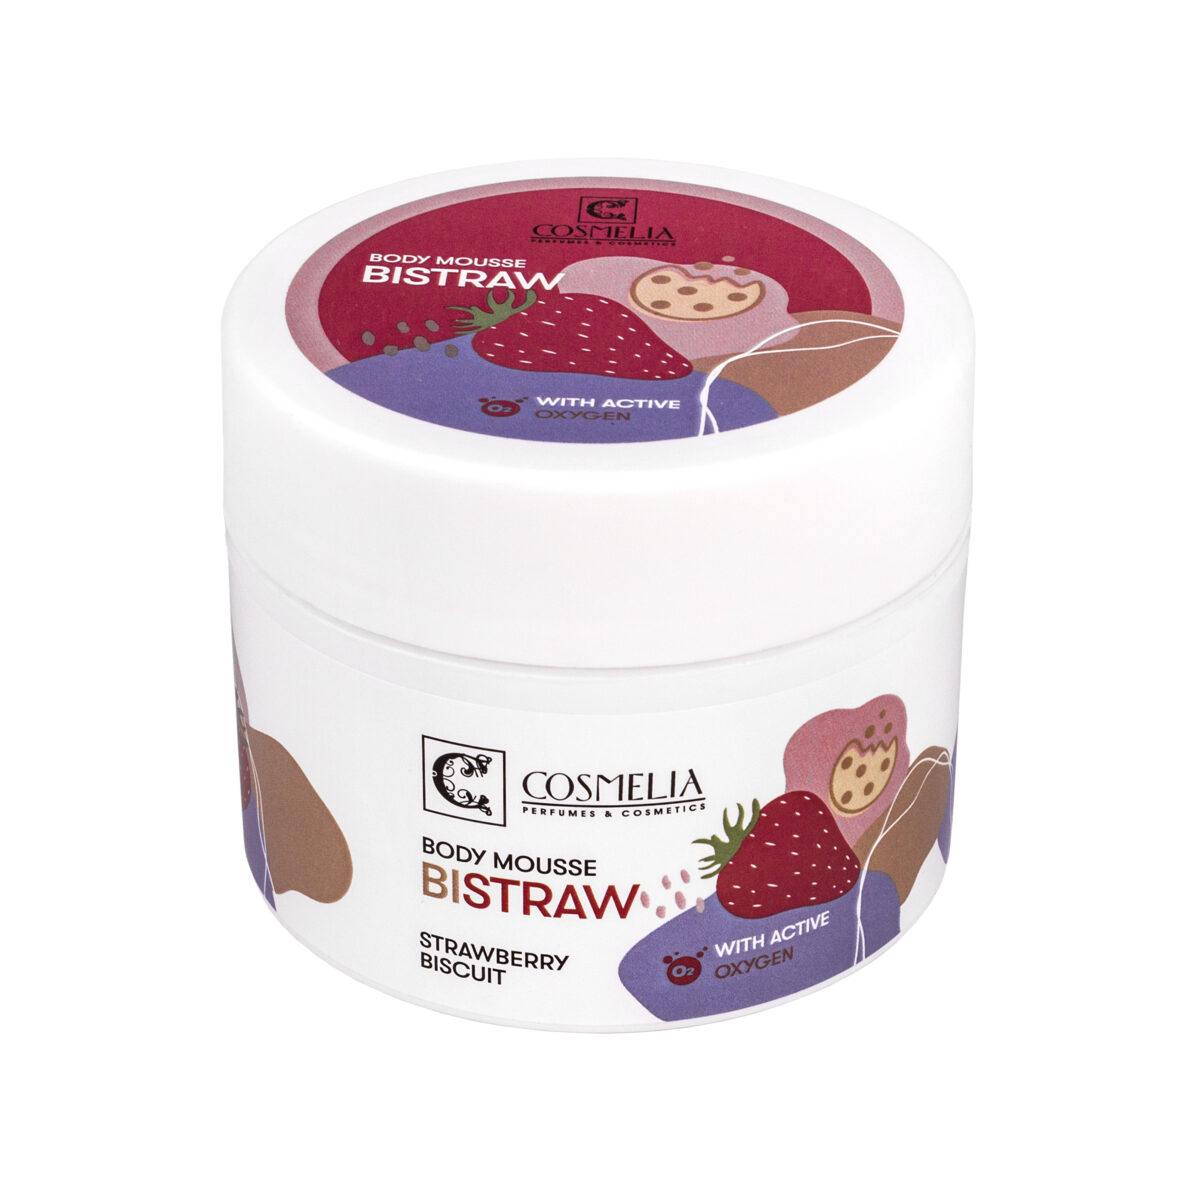 Cosmelia Bistraw Strawberry Biscuit Ενυδατική Mousse Σώματος 200ml